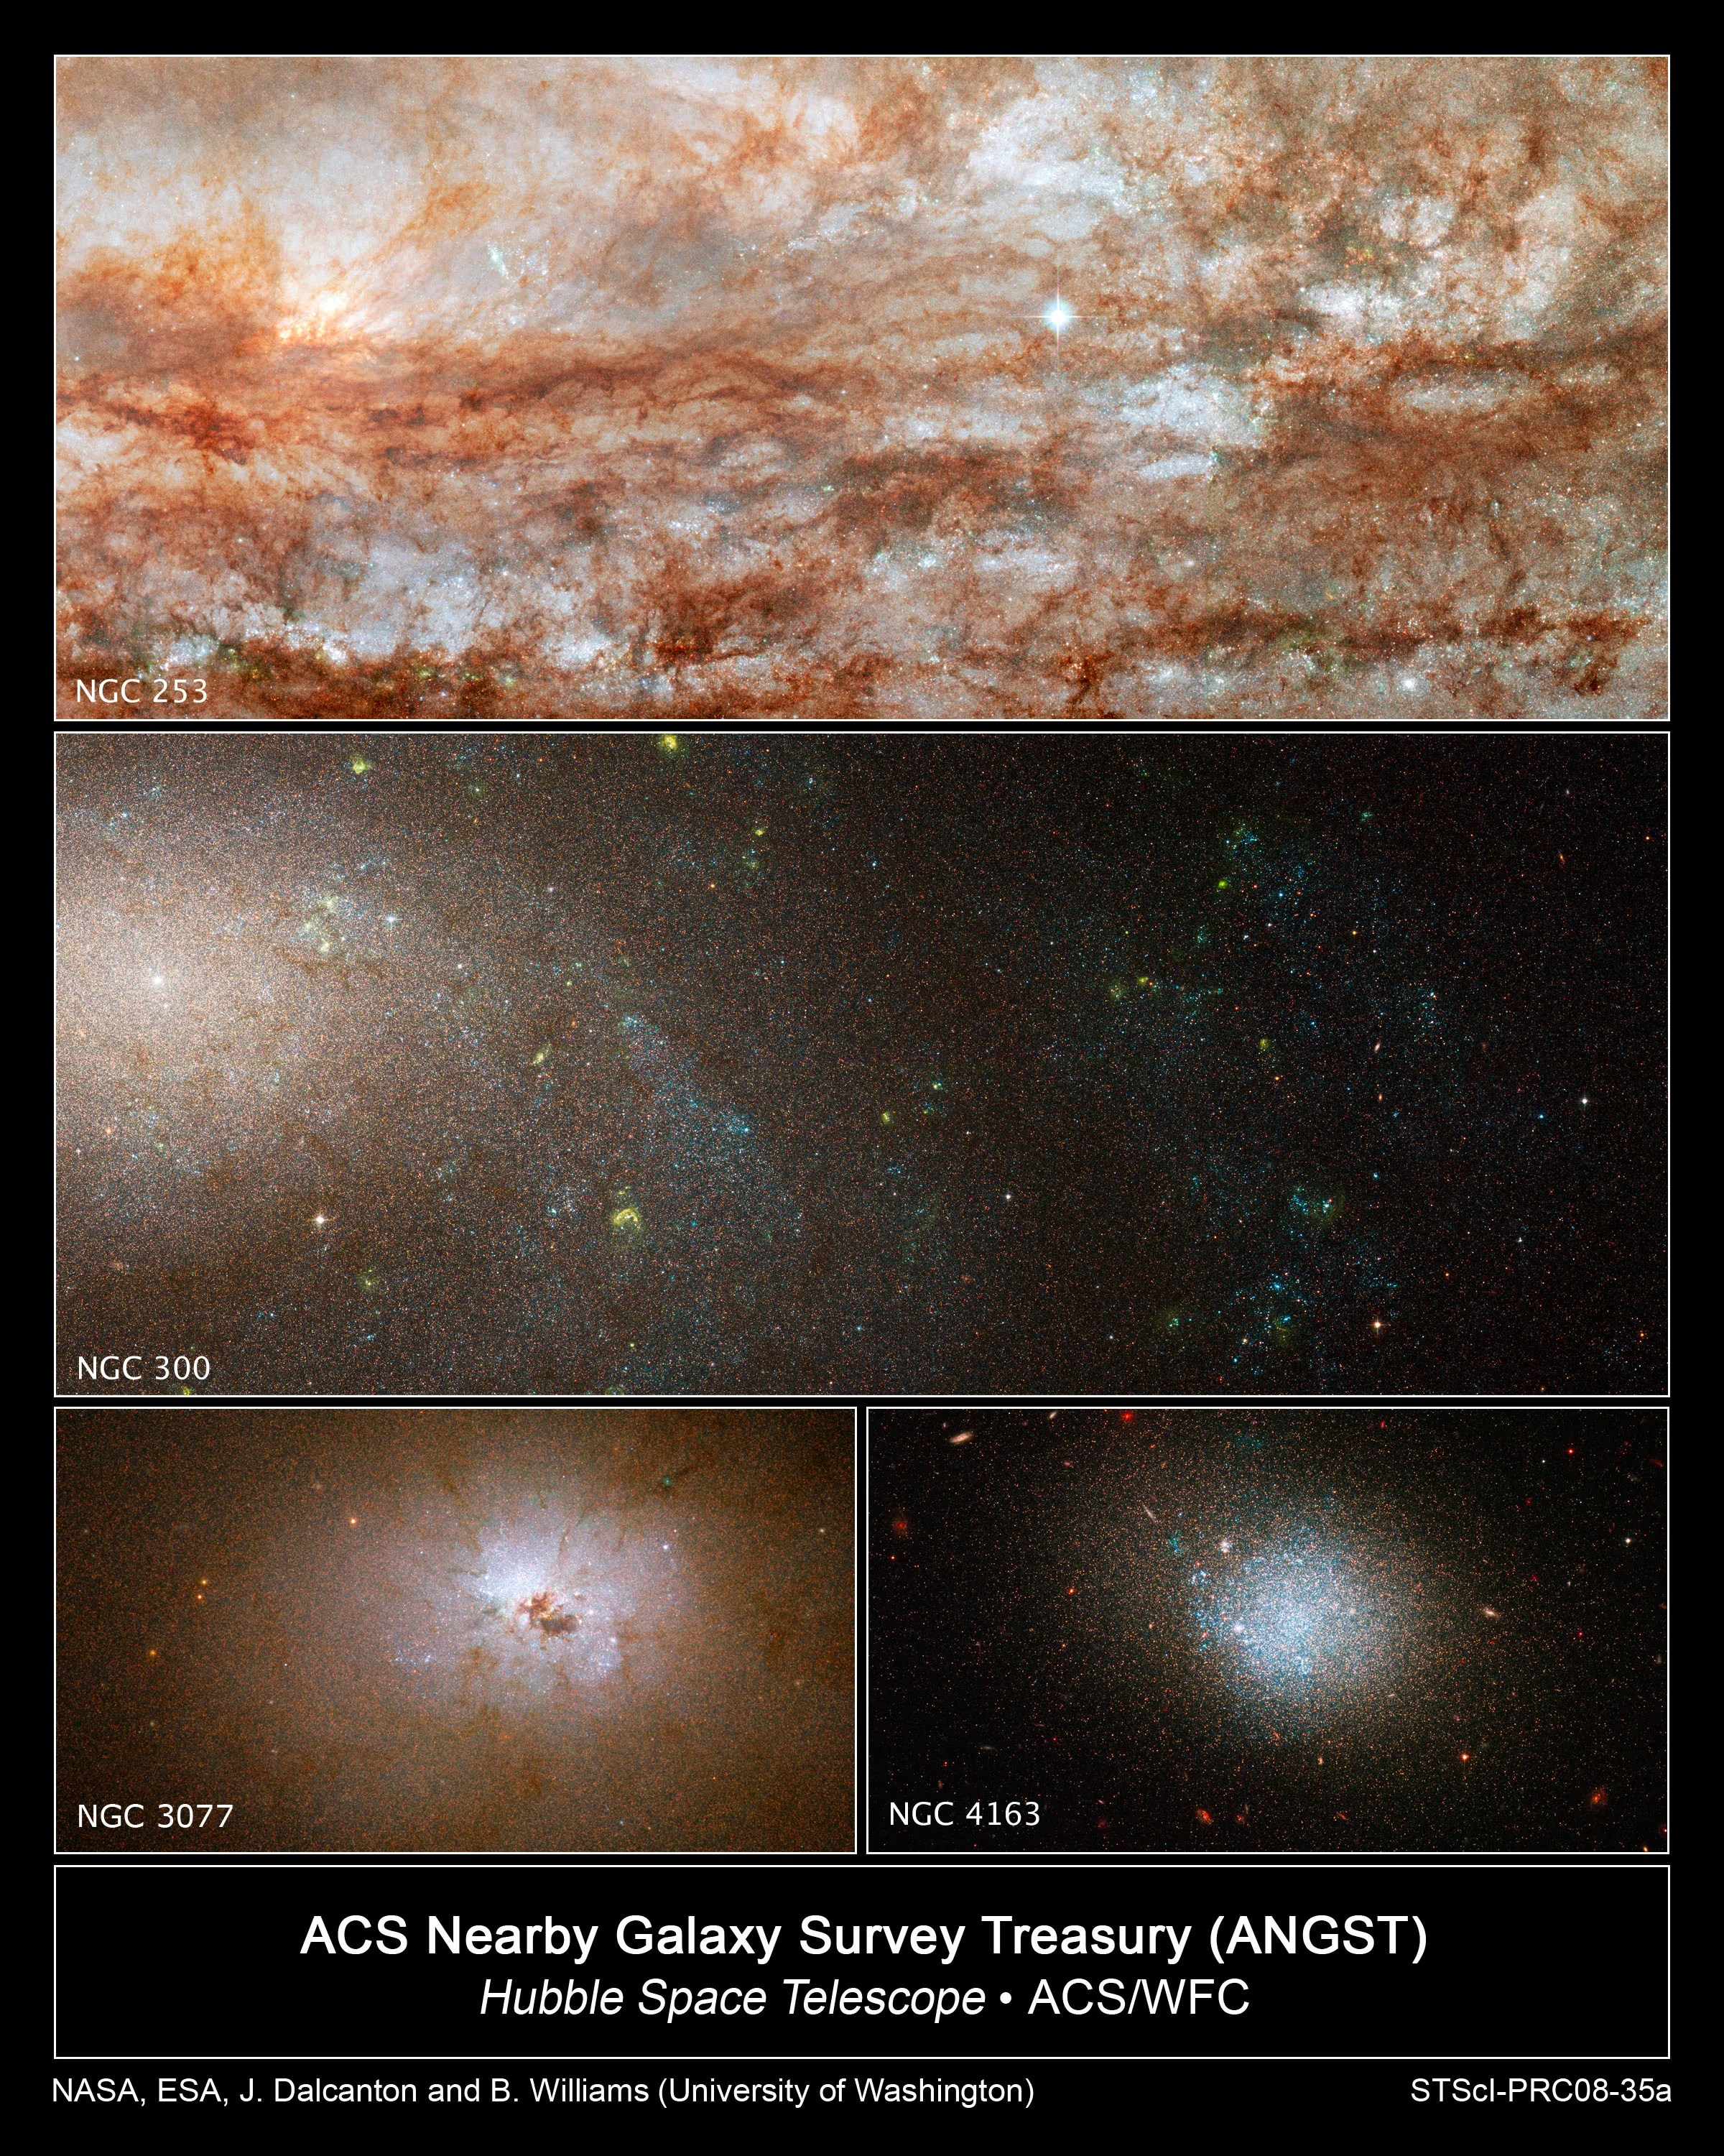 Hubble images of galaxies